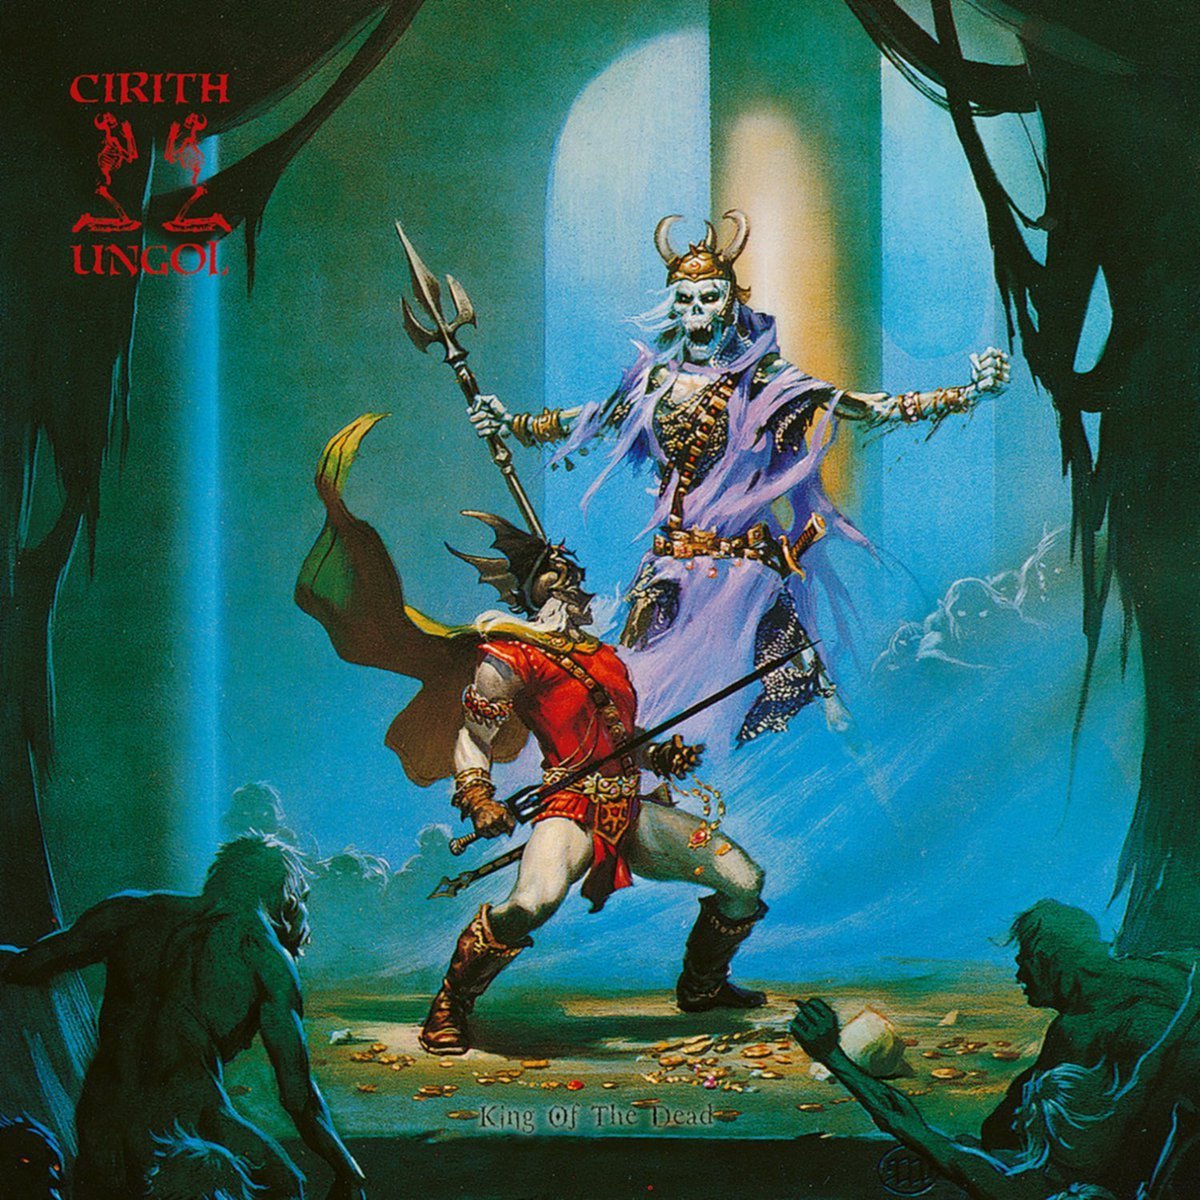 rt thisdayinmetal0 july 2nd 1984 cirithungol released the album king of the dead masterofthepit blackmachine deathofthesun atomsmasher heavymetal did you know the cover of RT @thisdayinmetal0: July 2nd 1984 #CirithUngol released the album “King Of The Dead” #MasterOfThePit #BlackMachine #DeathOfTheSun #AtomSmasher #HeavyMetal Did you know... The Cover of Michael Moorcock's novel "Bane of the Black Sword" acts as the album's cover. https://t.co/aExYKEmdCj | Cirith Ungol Online